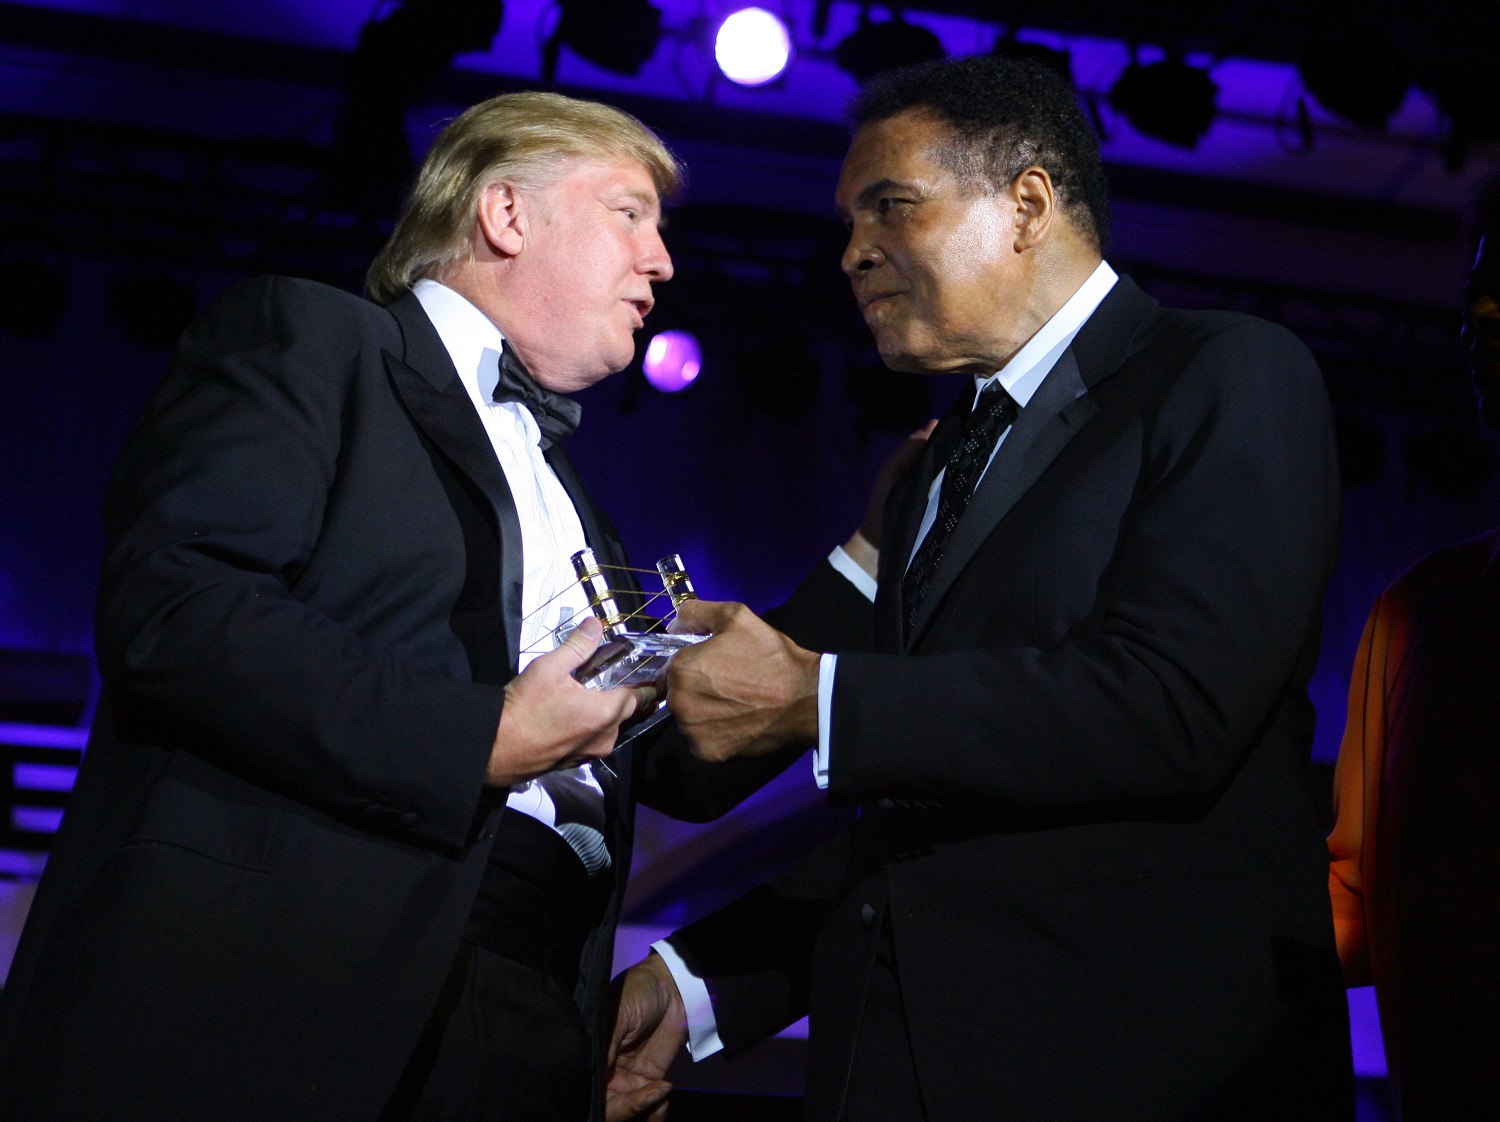 Muhammad Ali Jr. Says His Father Would Have Supported Donald Trump and Hated Black Lives Matter